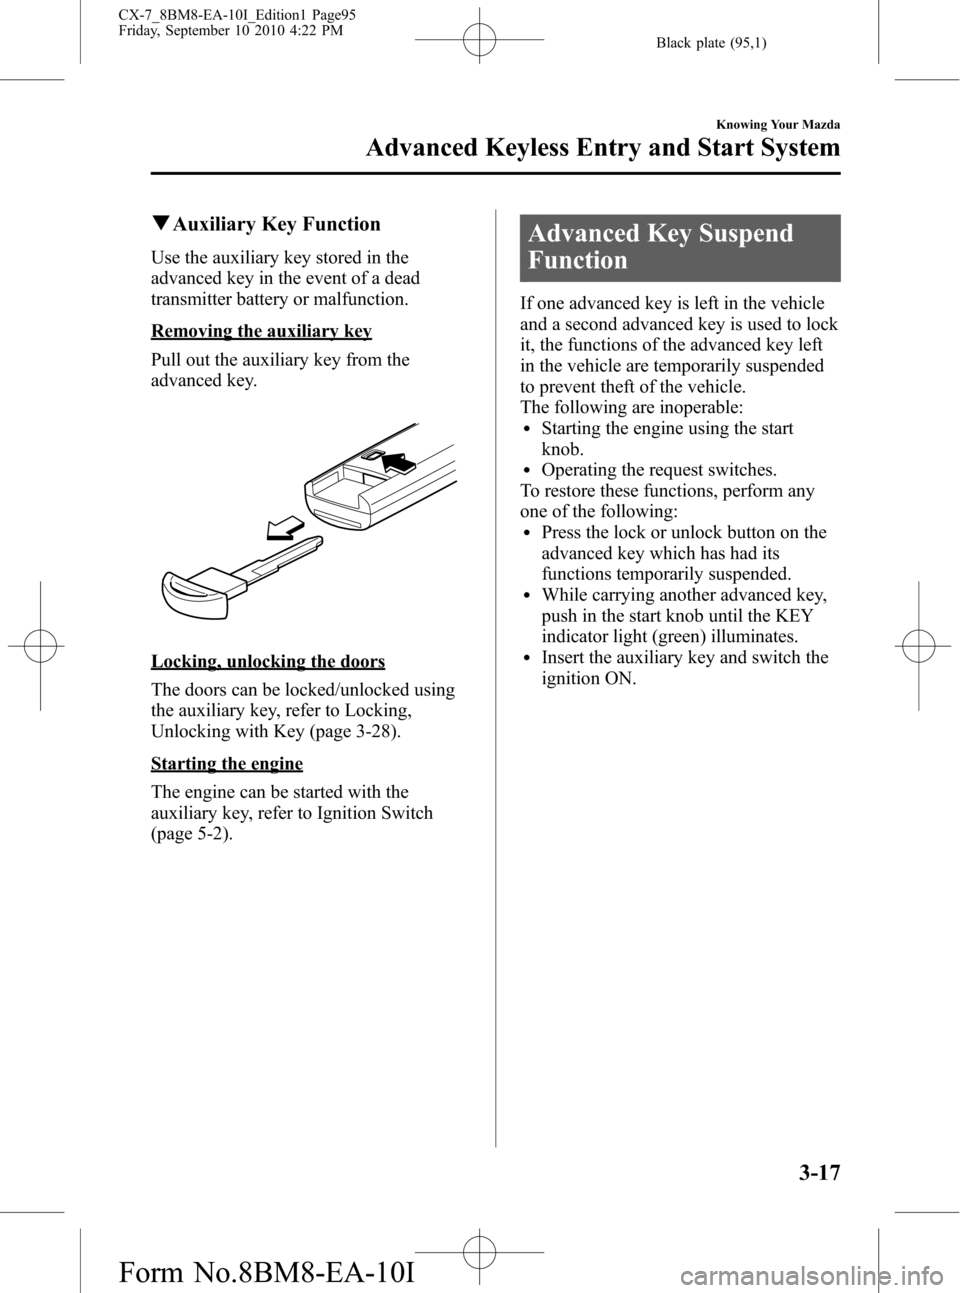 MAZDA MODEL CX-7 2011  Owners Manual (in English) Black plate (95,1)
qAuxiliary Key Function
Use the auxiliary key stored in the
advanced key in the event of a dead
transmitter battery or malfunction.
Removing the auxiliary key
Pull out the auxiliary